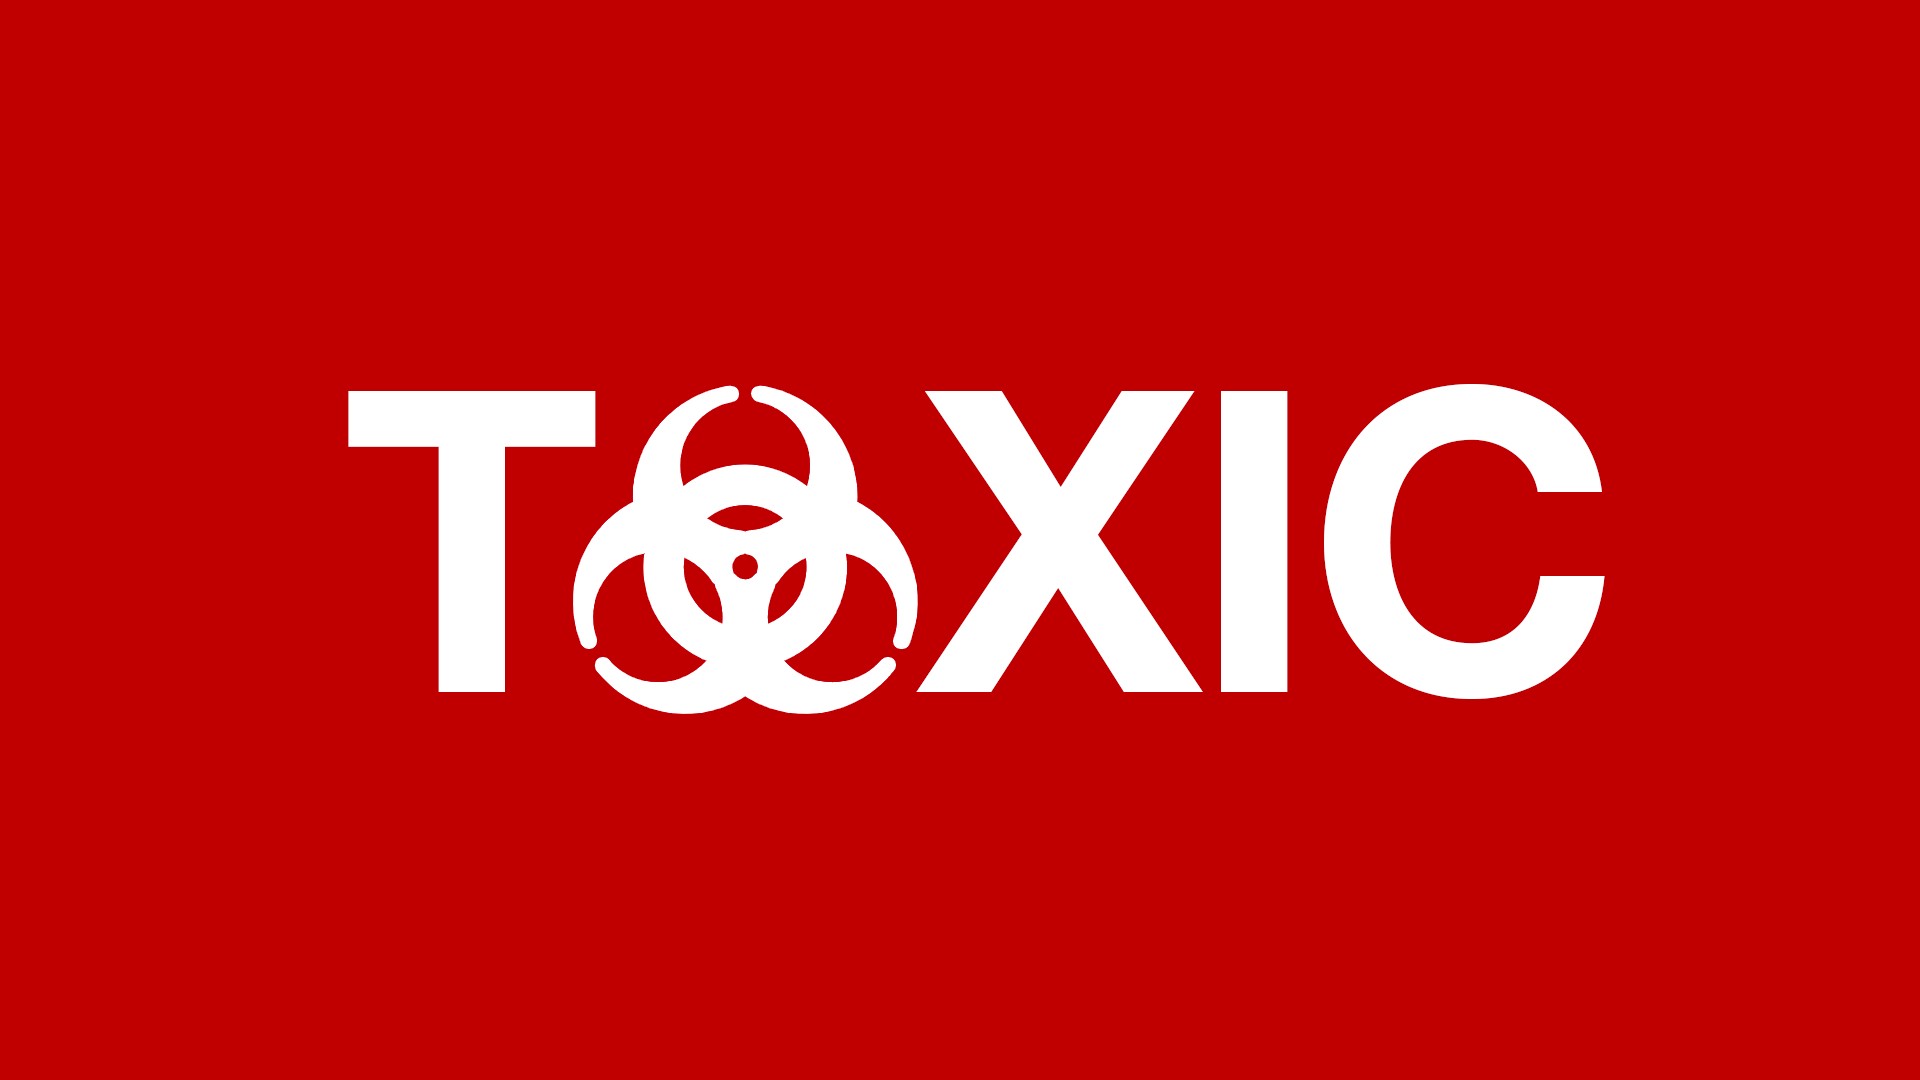 Toxic' Is Oxford's Word of the Year. No, We're Not Gaslighting You